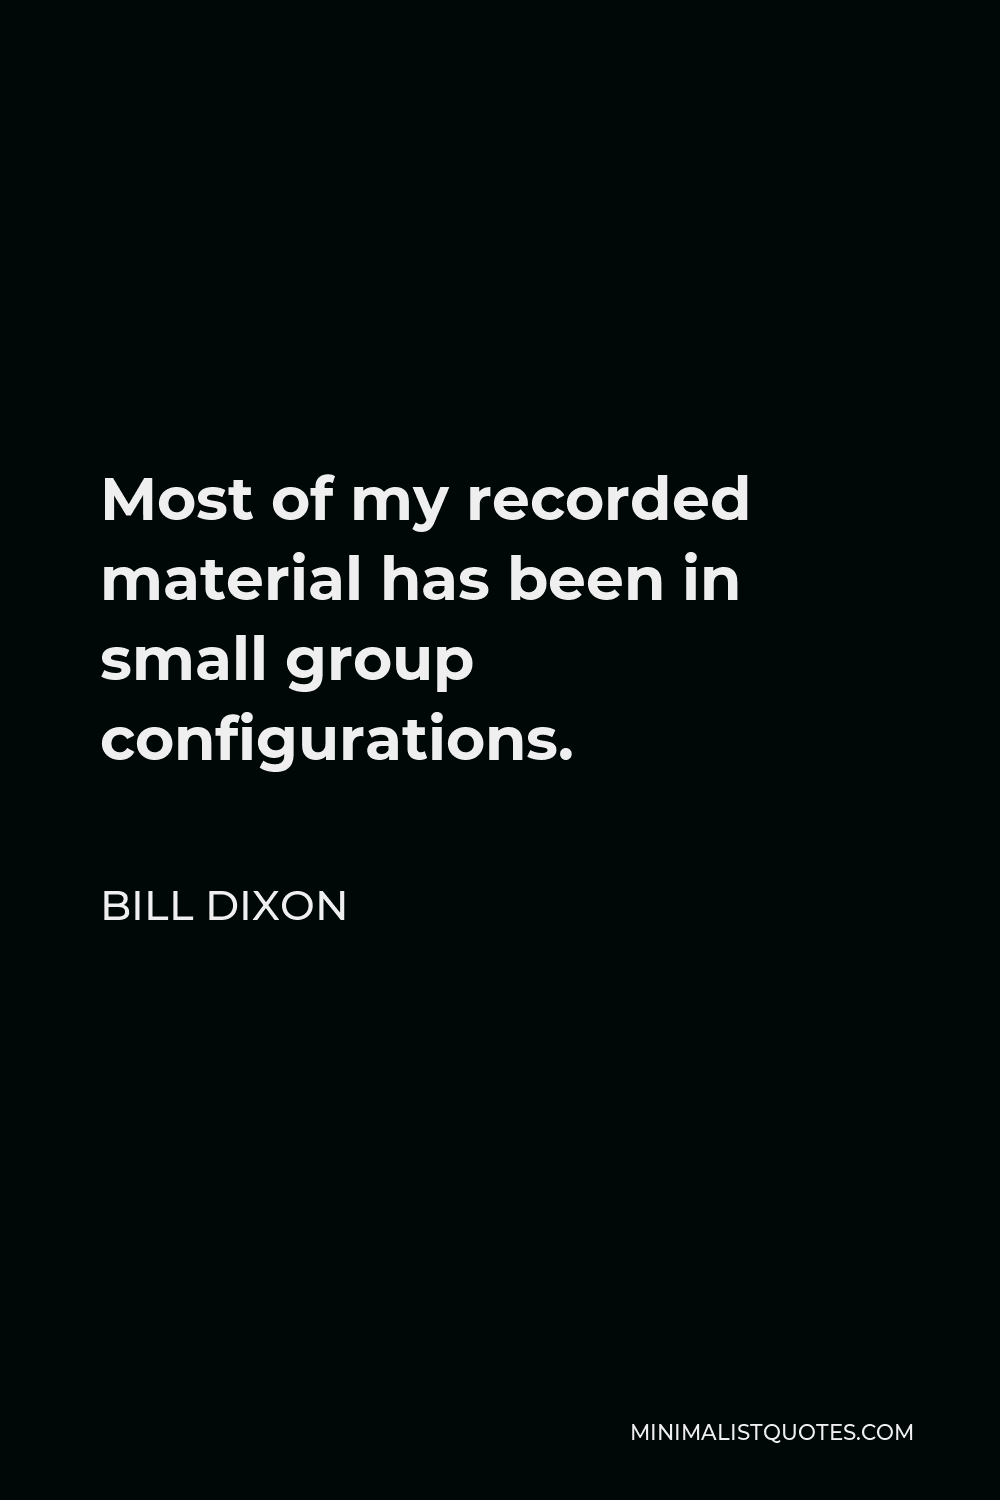 Bill Dixon Quote - Most of my recorded material has been in small group configurations.